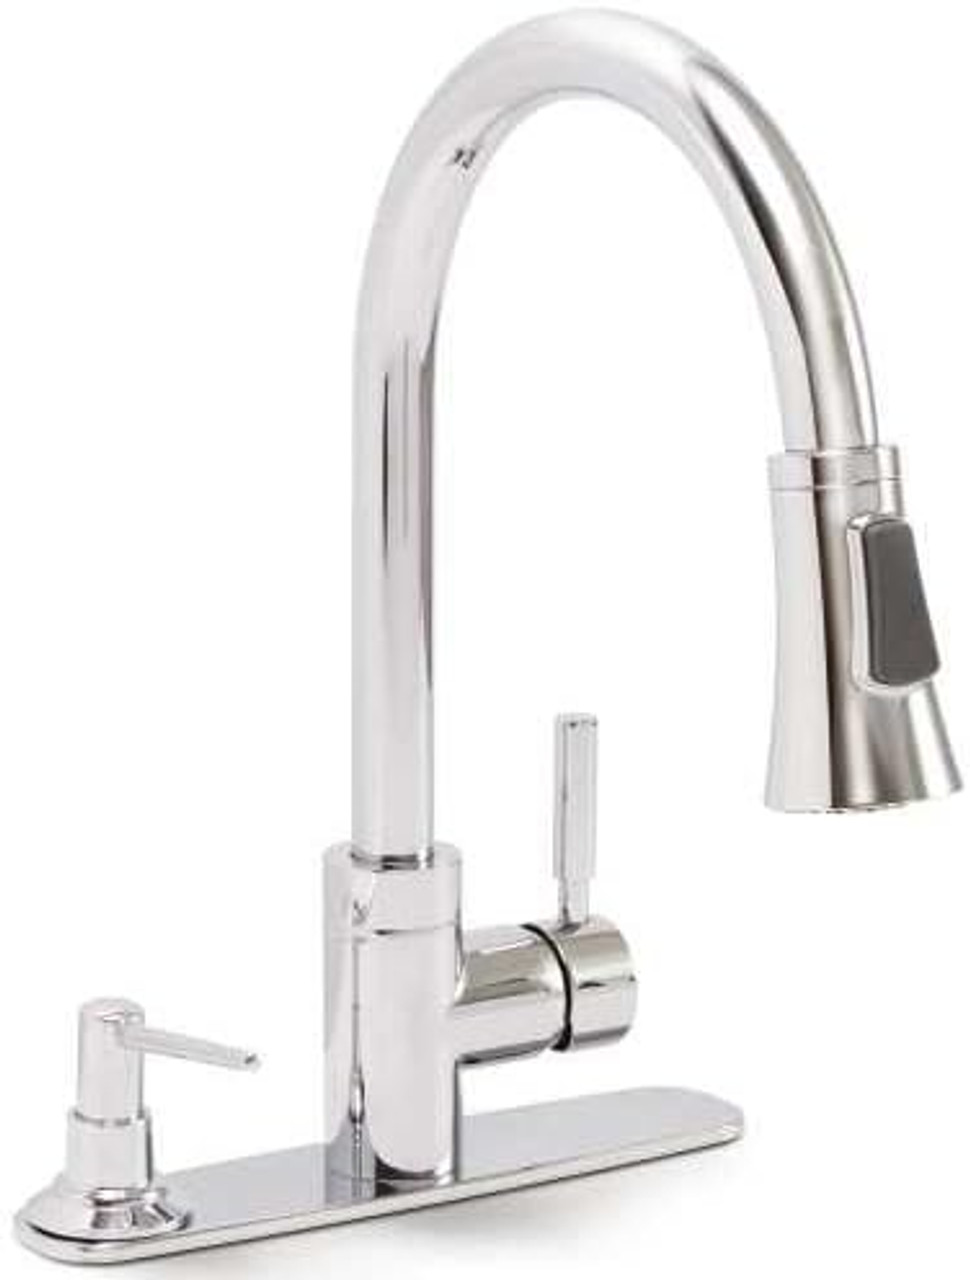 Premier Faucet 2495797 Kitchen Faucet with Pull-Down and Soap Dispenser